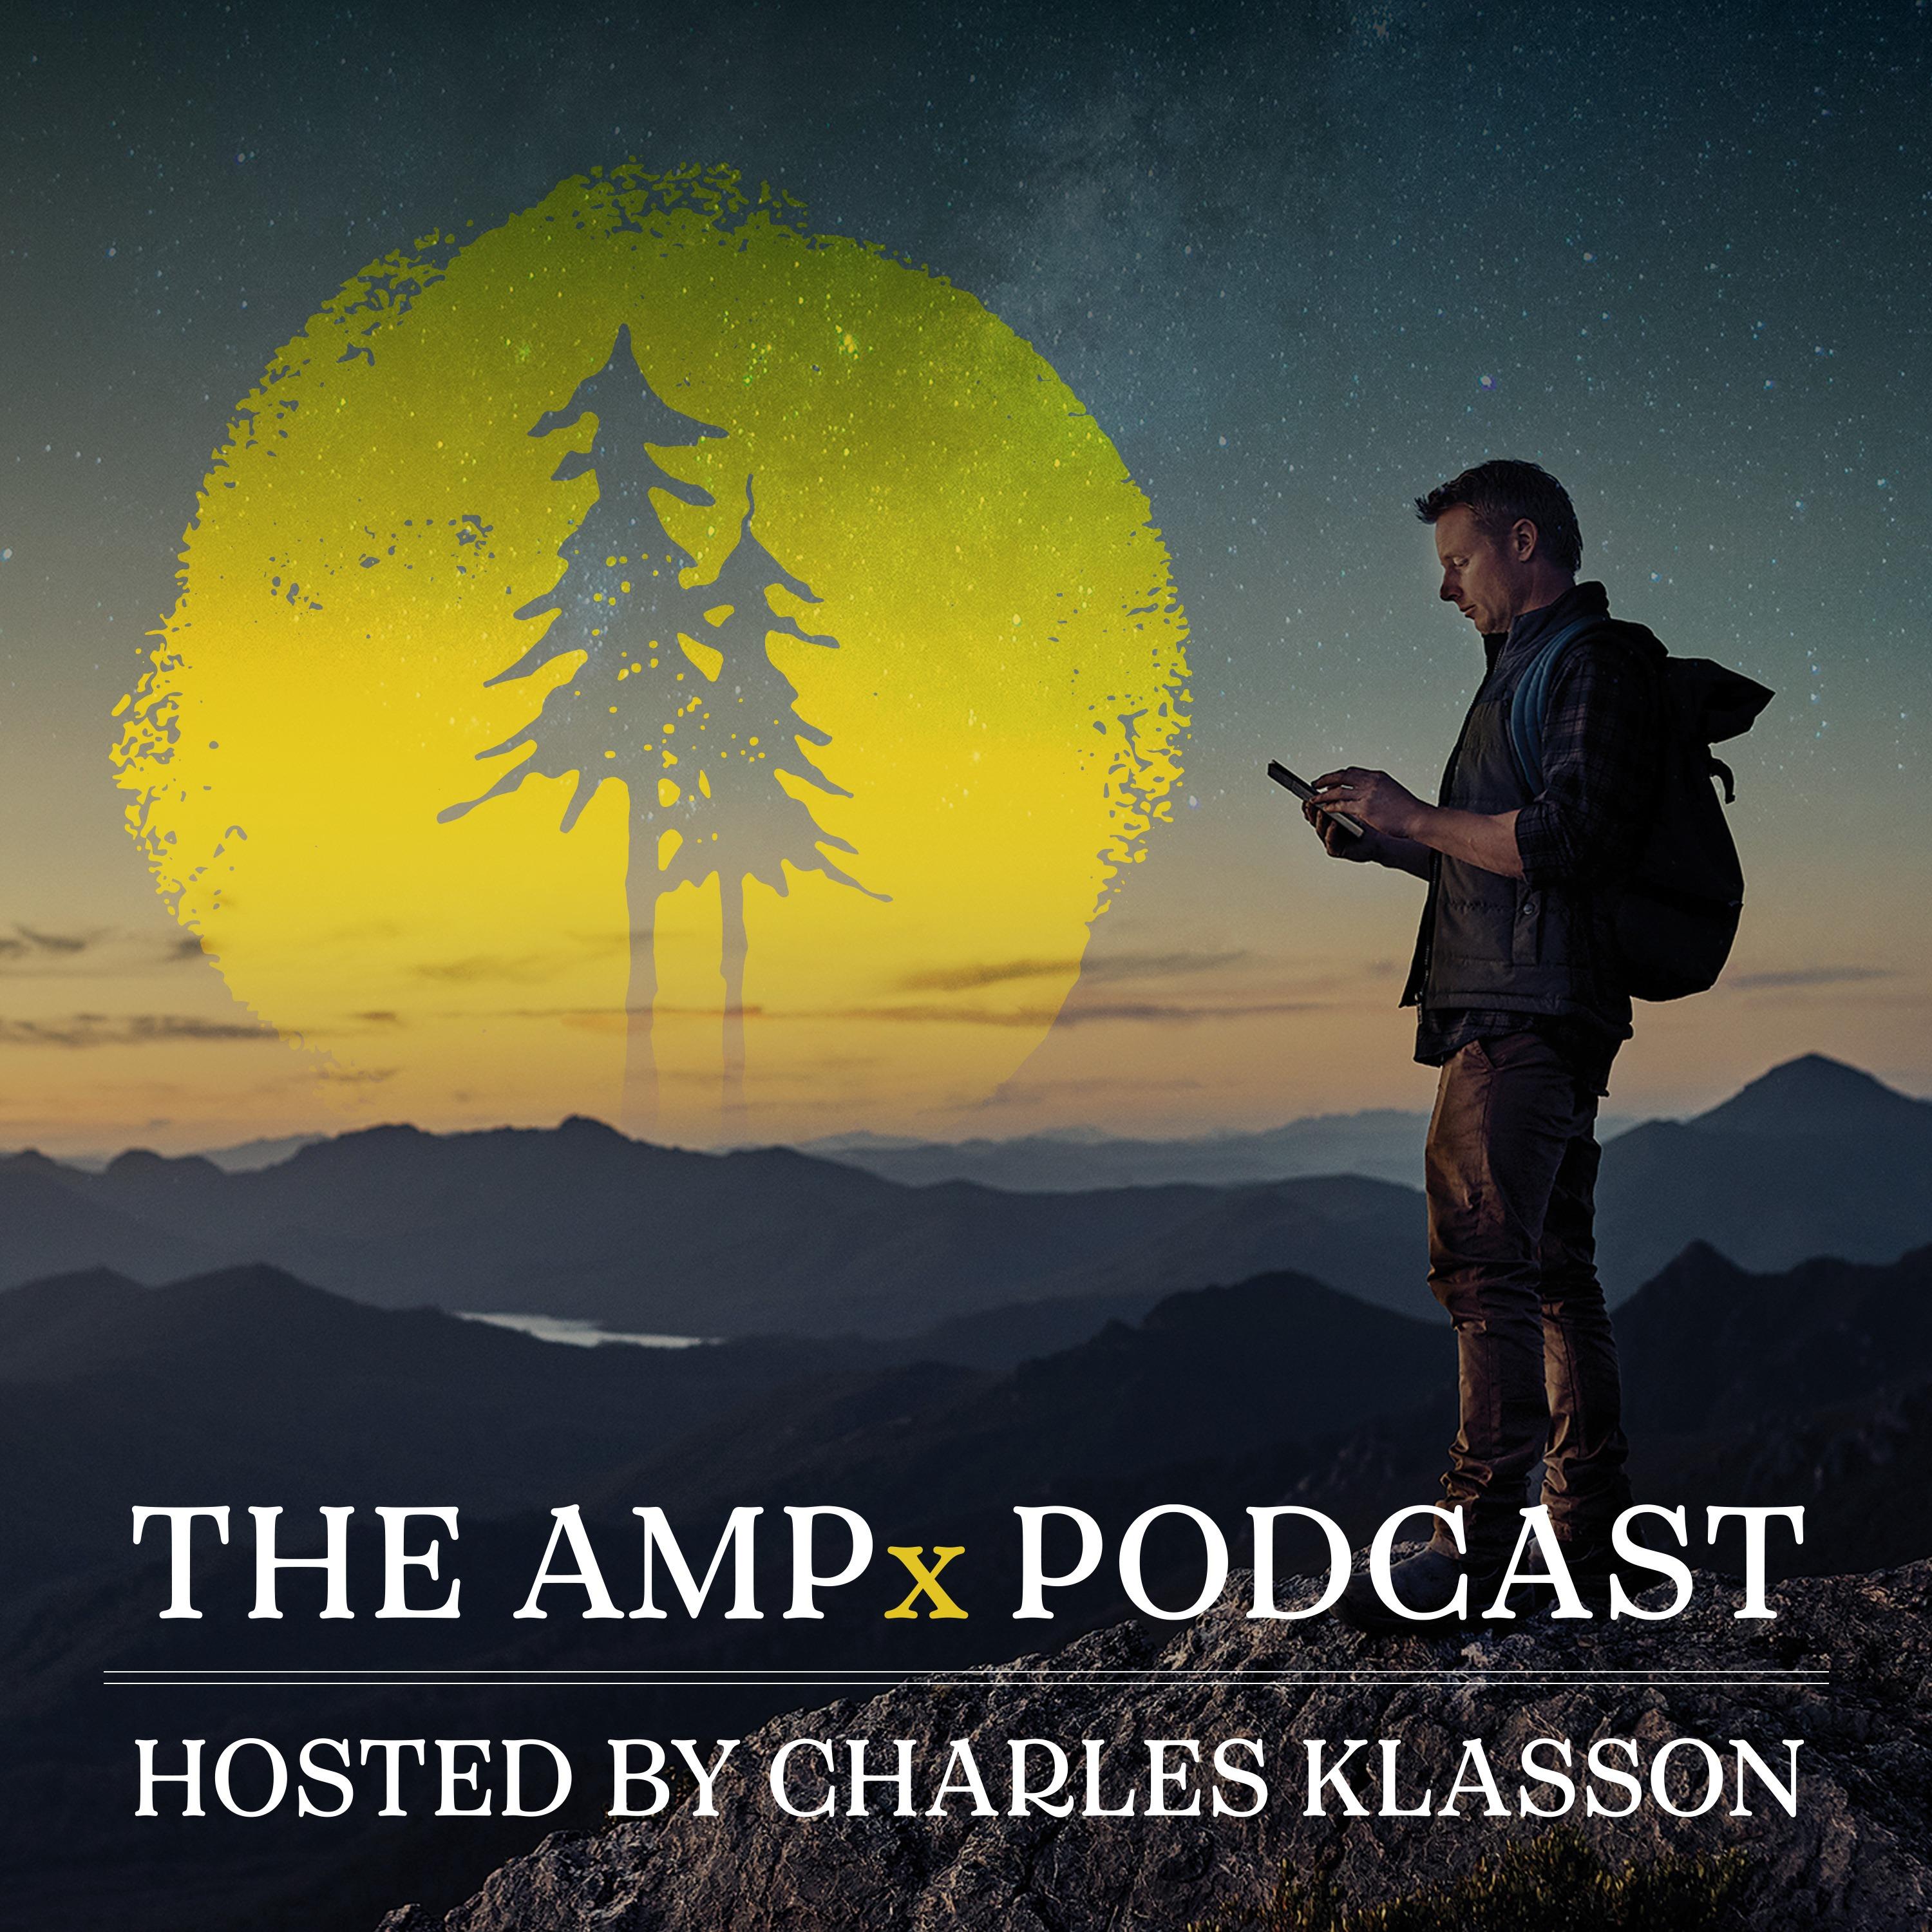 The AMPx Podcast